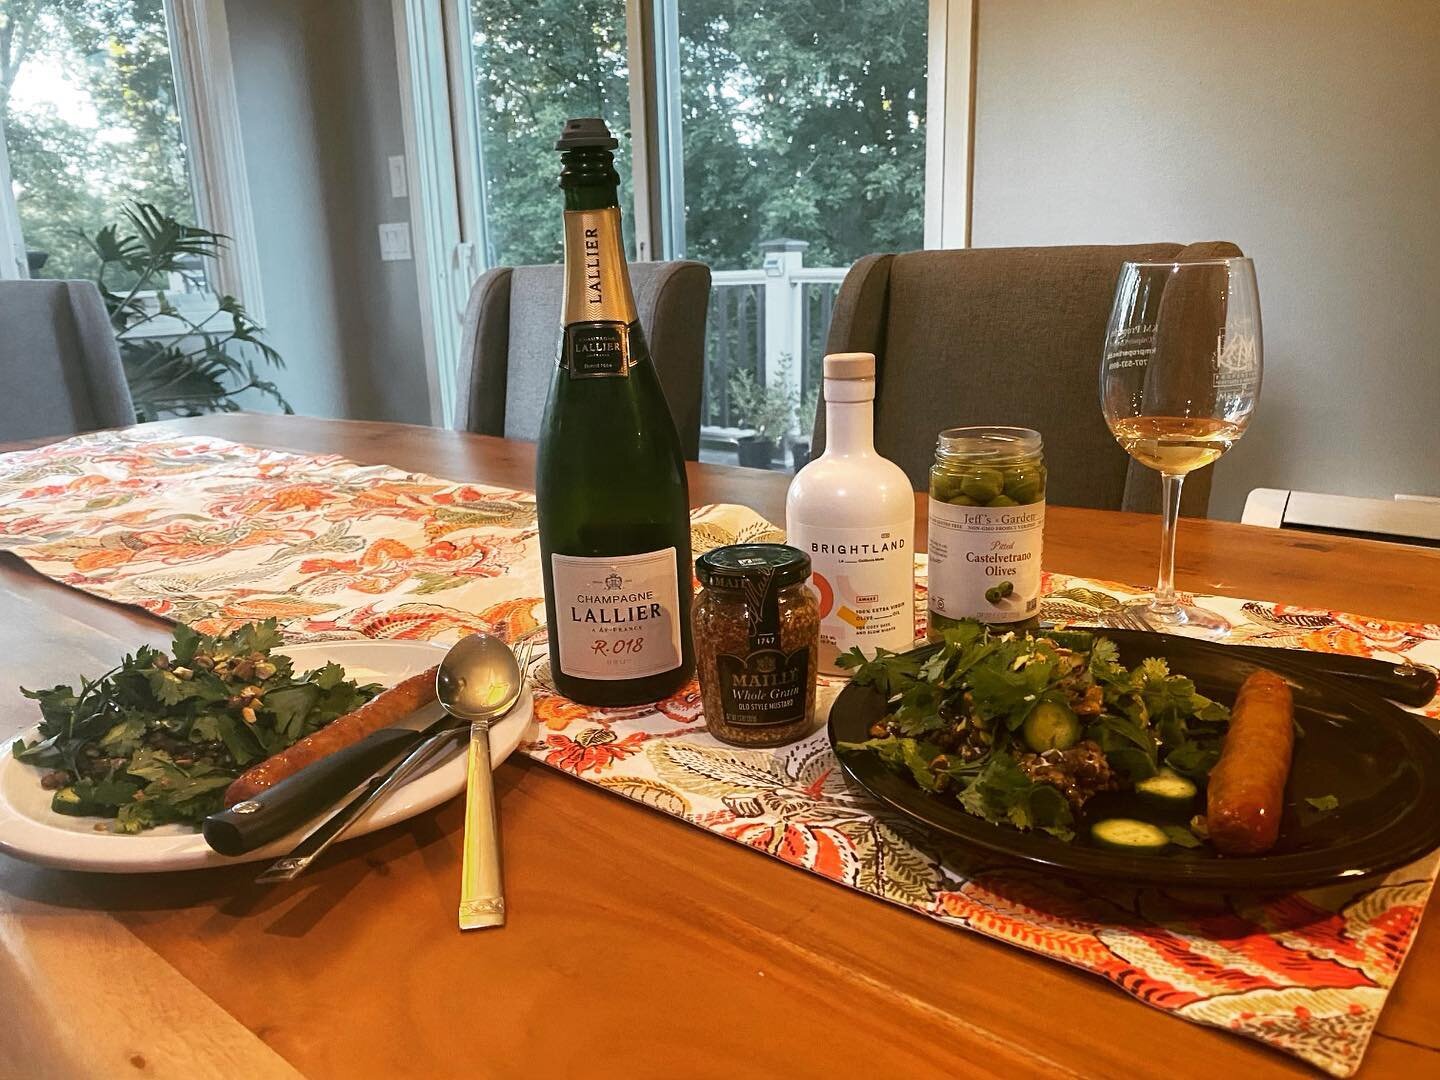 What a parfaite picnique dinner with @breiteradventures. Thanks to @food52, @champagne_lallier and @alisoneroman for a wonderful evening and lentil recipe with So. Many. Herbs. #dill #lallier #champagne